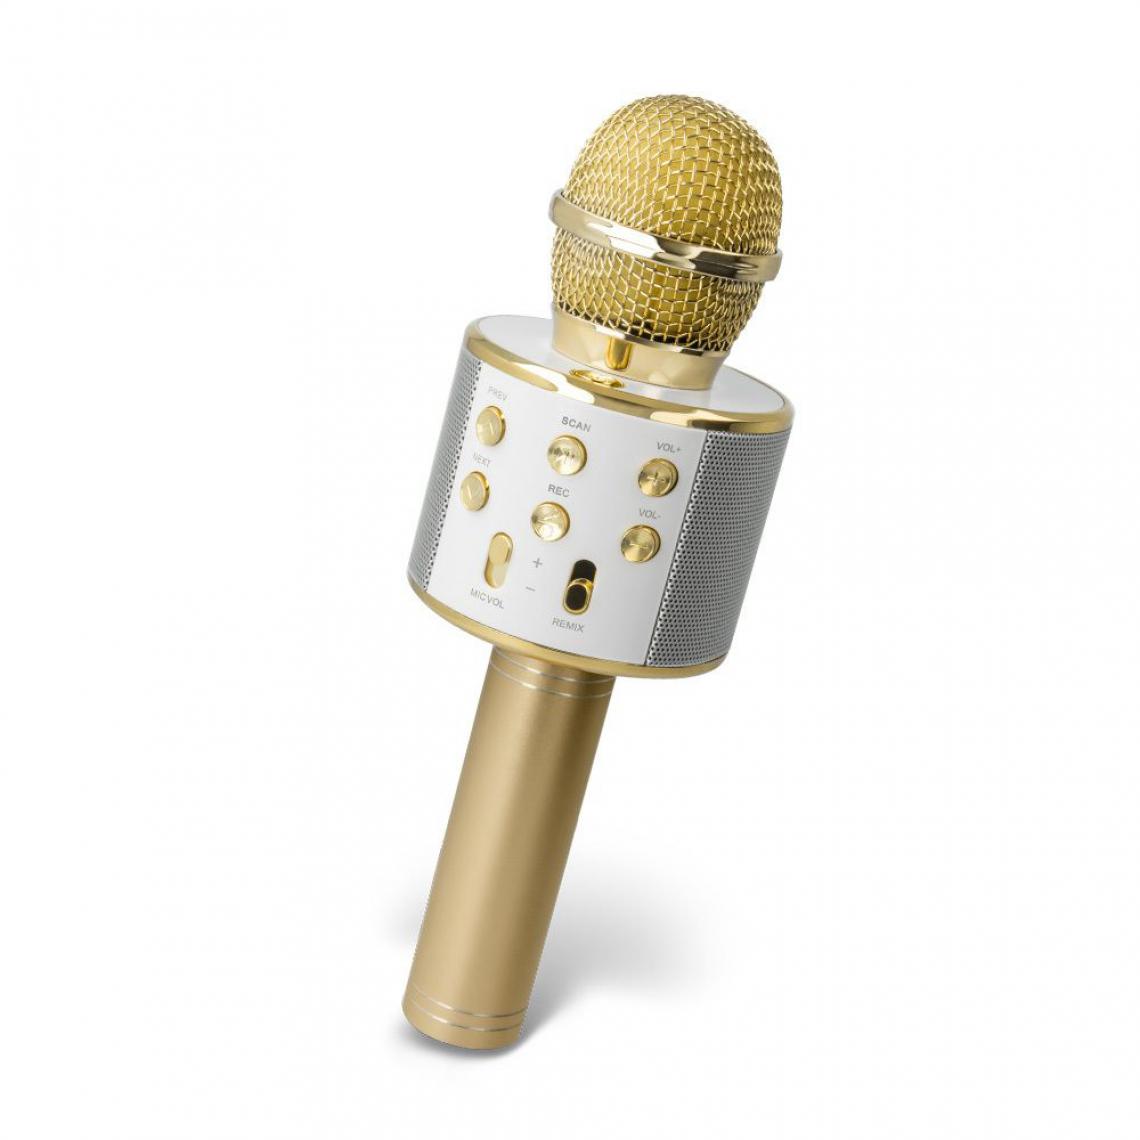 Ozzzo - Microphone Karaoke bluetooth haut parleur ozzzo Gold Or pour Micromax in Note 1 - Autres accessoires smartphone